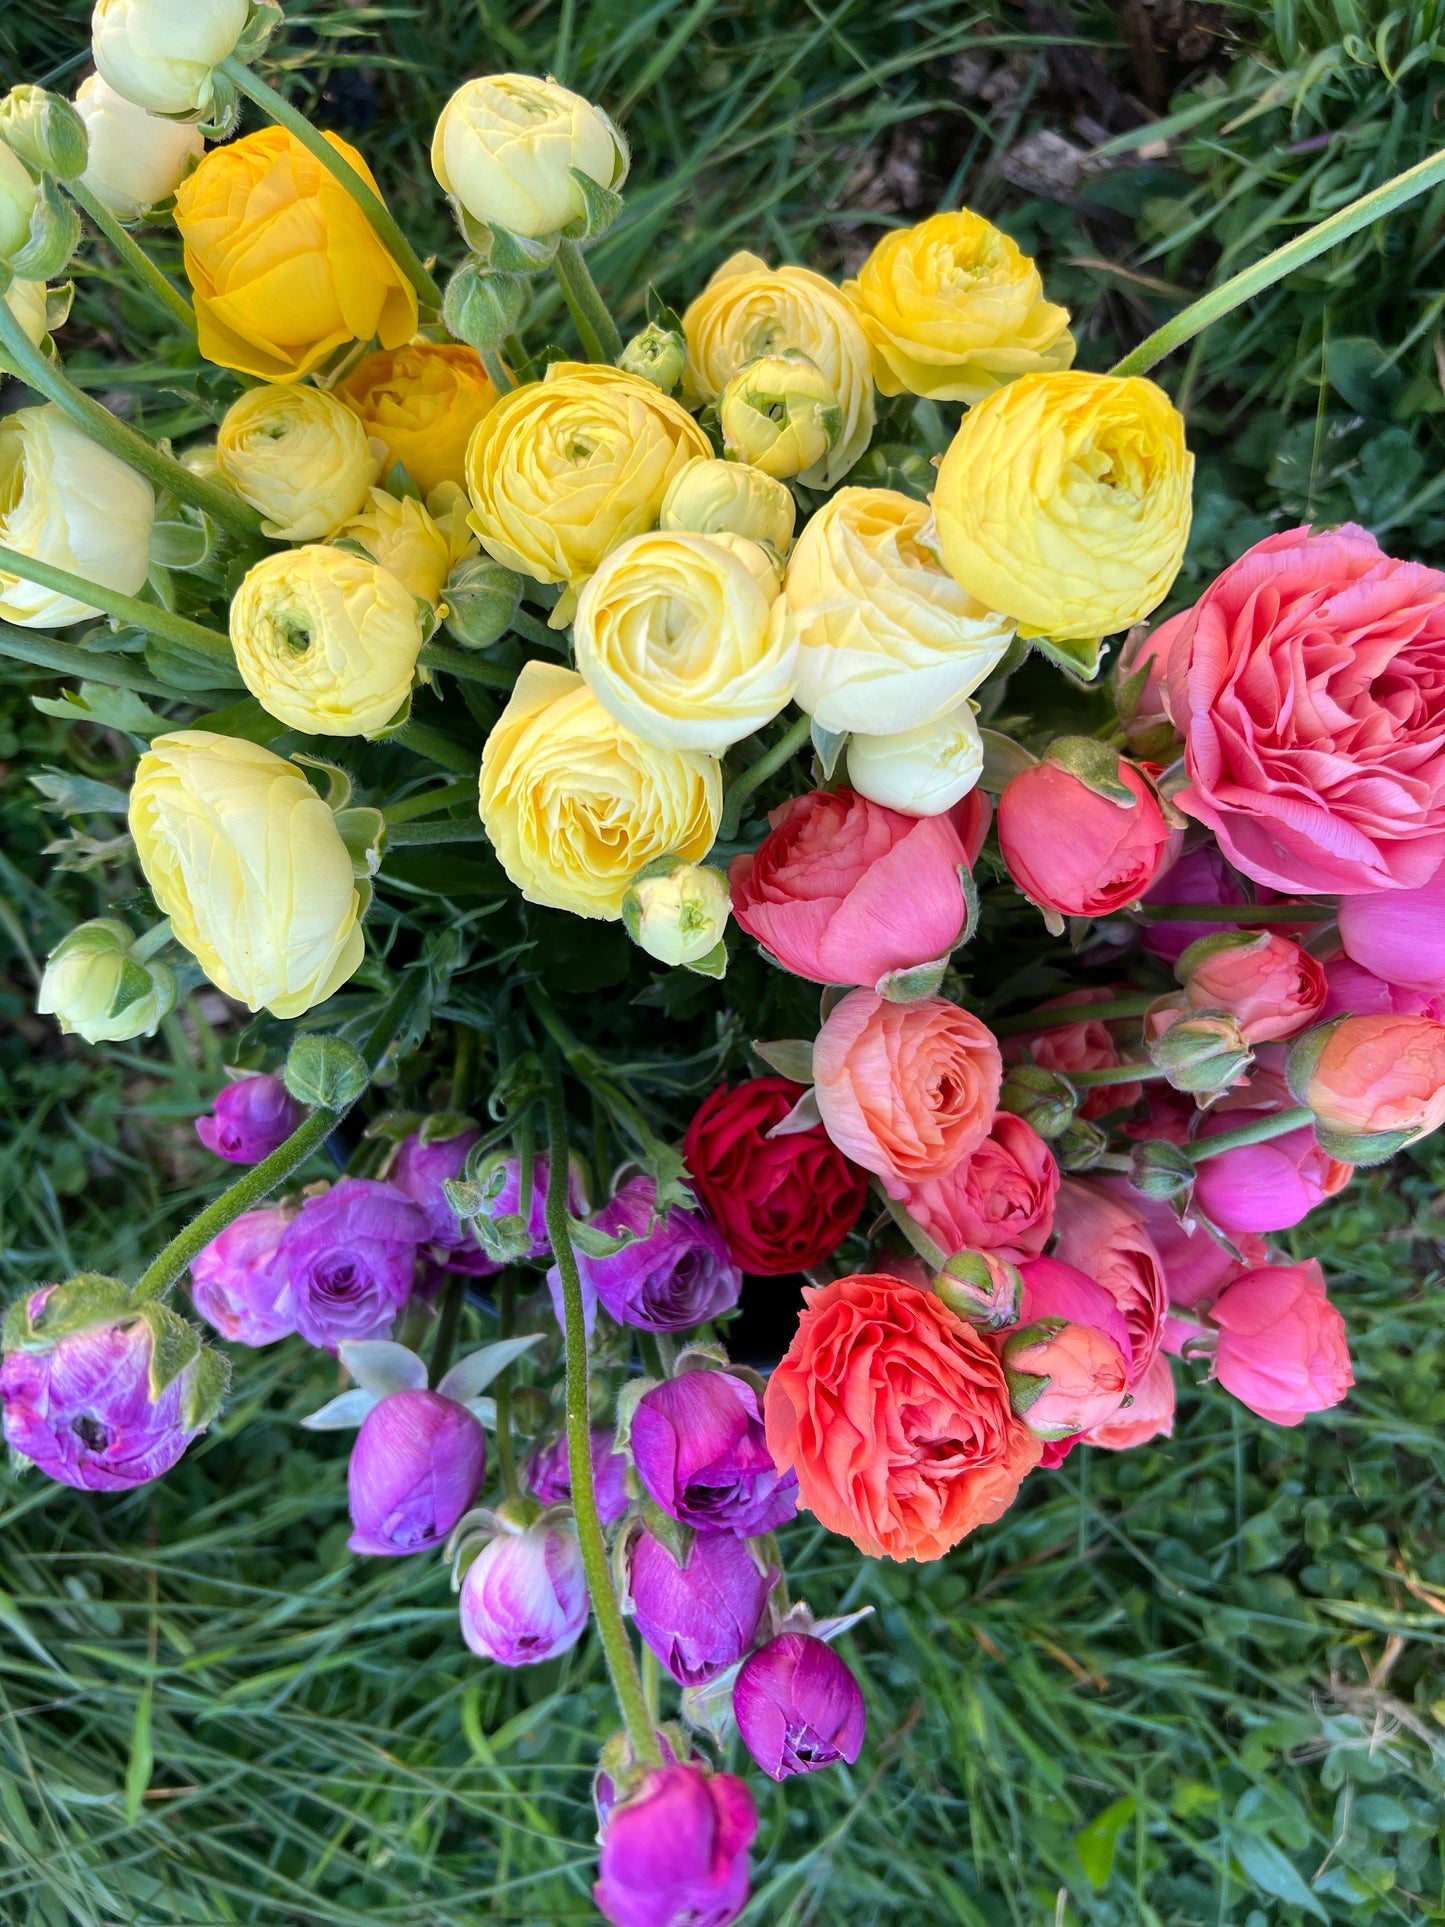 Ranunculus Elegance Milka - 20 corms - Available Now